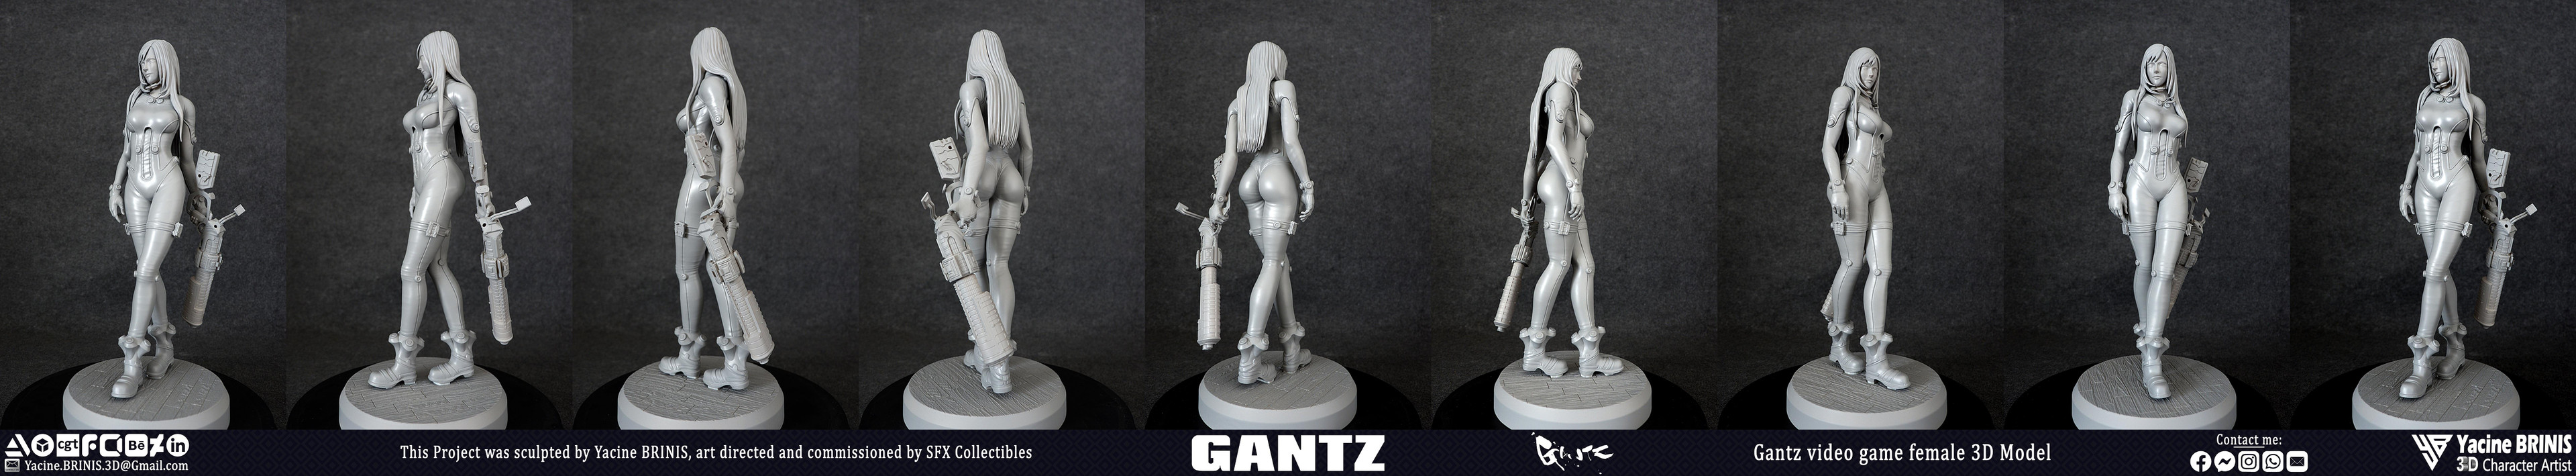 Gantz Video Game Female 3D Model sculpted by Yacine BRINIS 019 Printed by SFX Collectibles